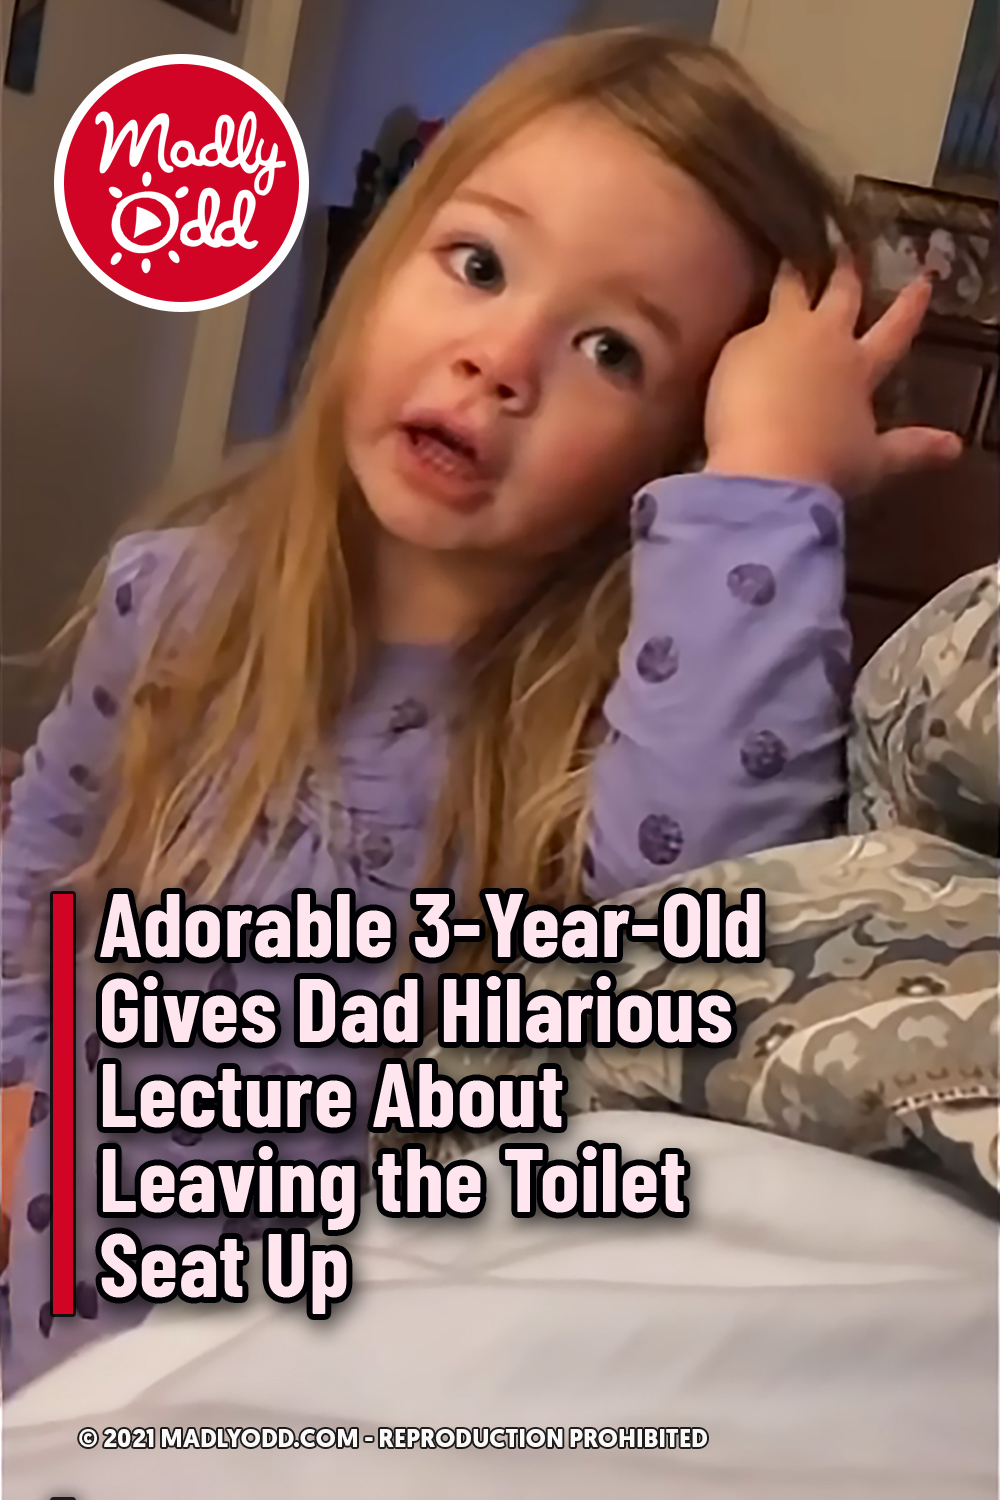 Adorable 3-Year-Old Gives Dad Hilarious Lecture About Leaving the Toilet Seat Up